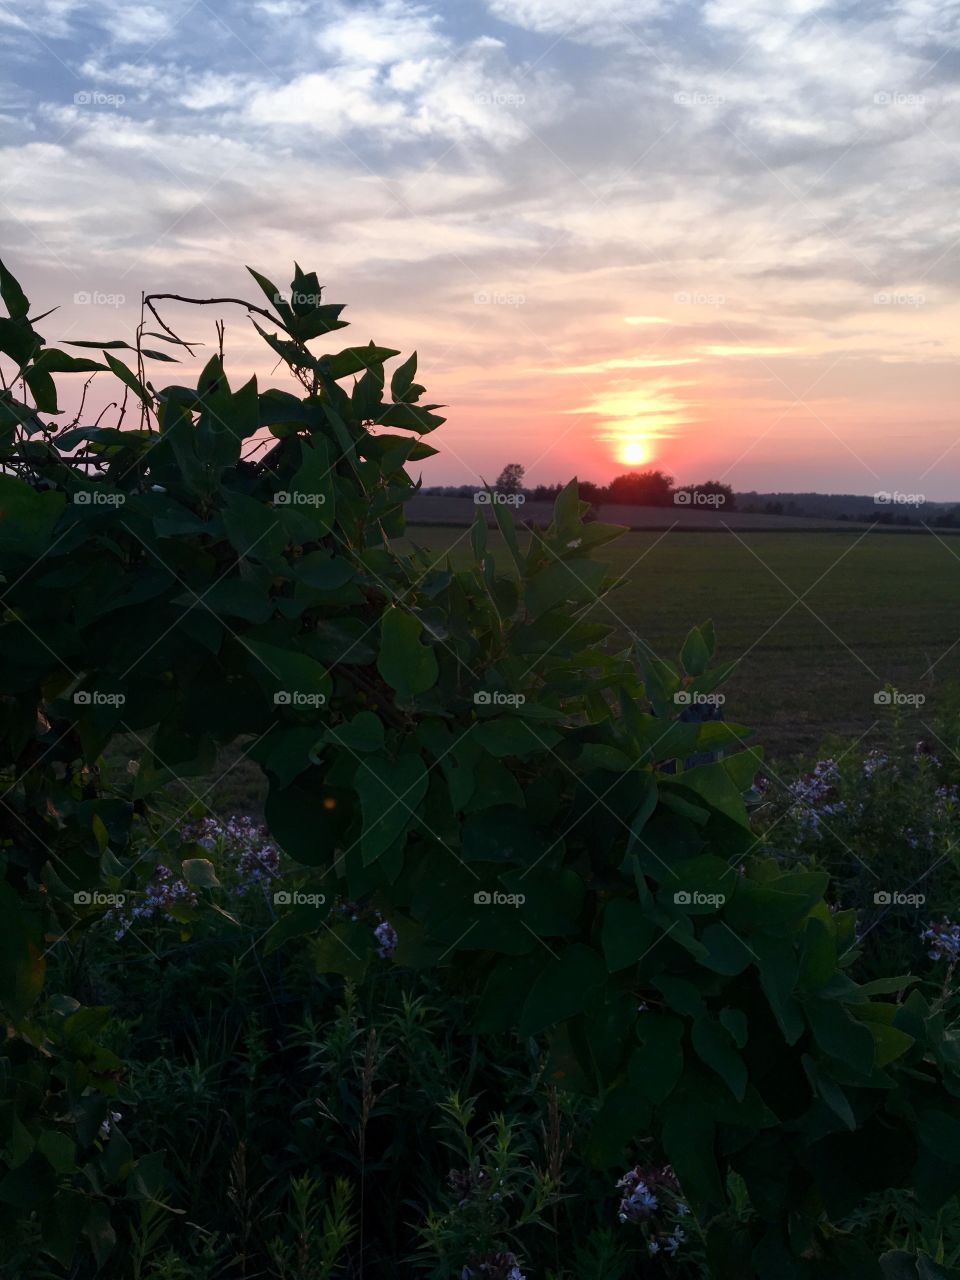 A beautiful red to purple sky as the sun sets over a farmers field. In the foreground is lush foliage with large leaves and off purple flowers.